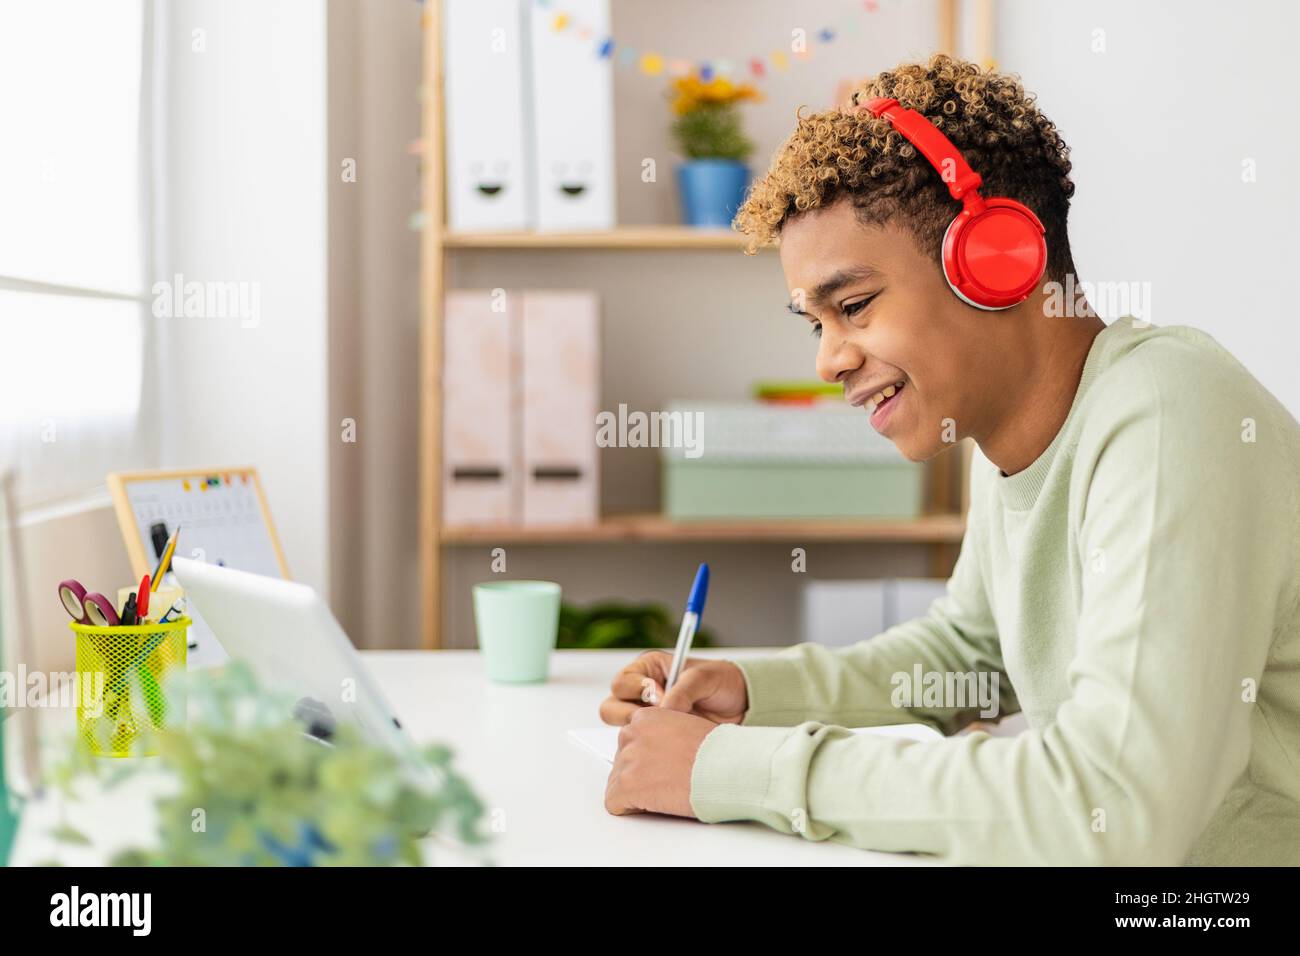 Smiling young hispanic latin man using digital table to study online at home Stock Photo